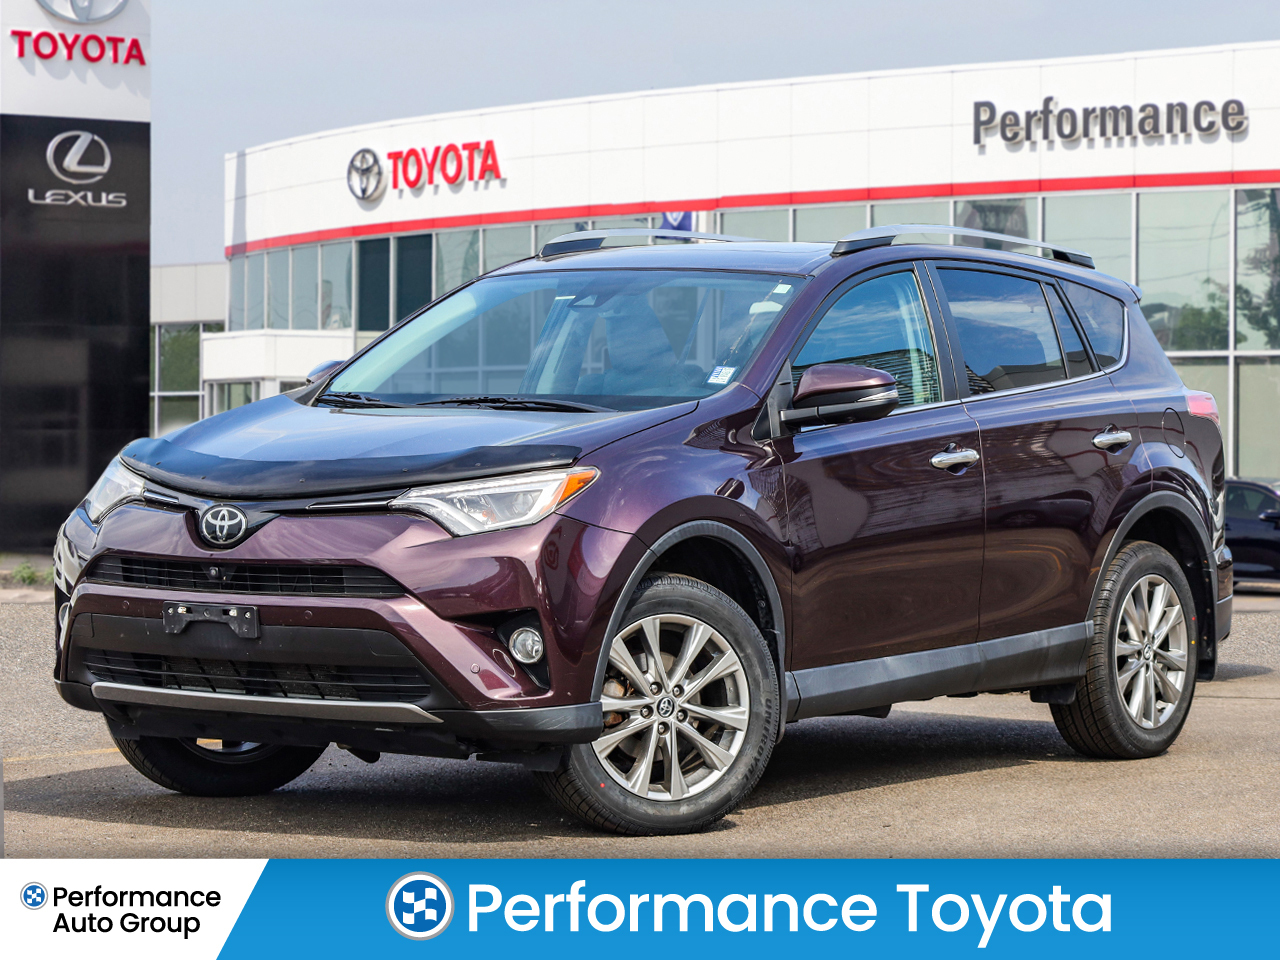 2017 Toyota RAV4 Limited AWD, One Owner, Navigation, Leather Seats